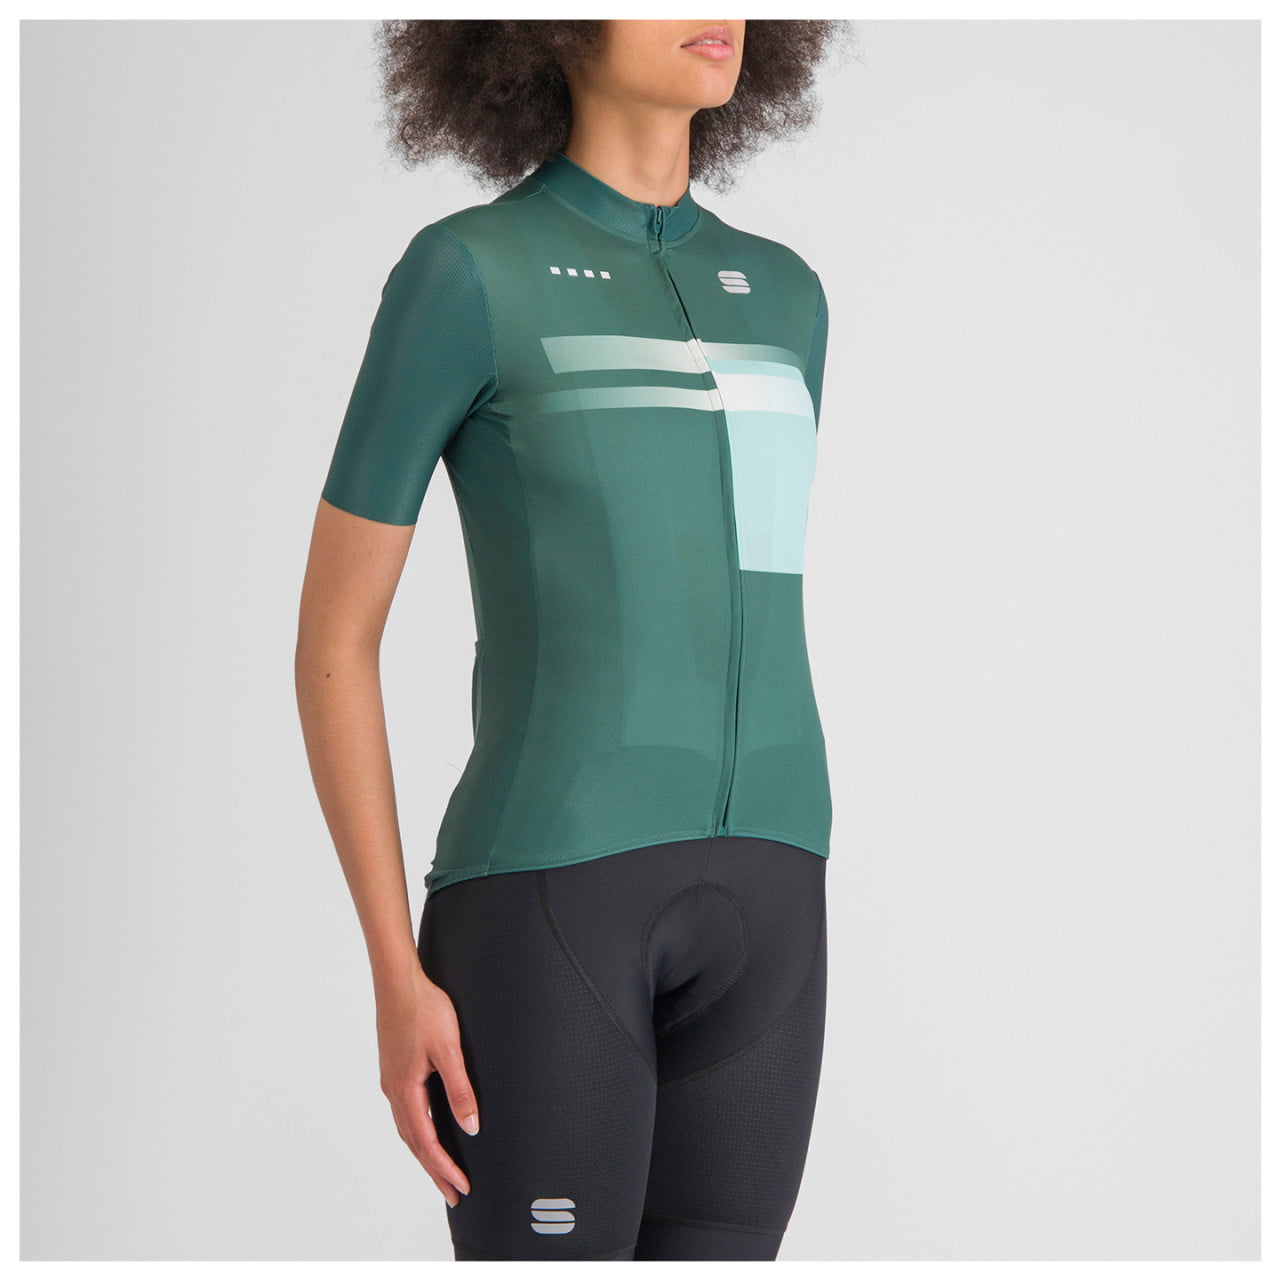 Maillot mangas cortas mujer Gruppetto